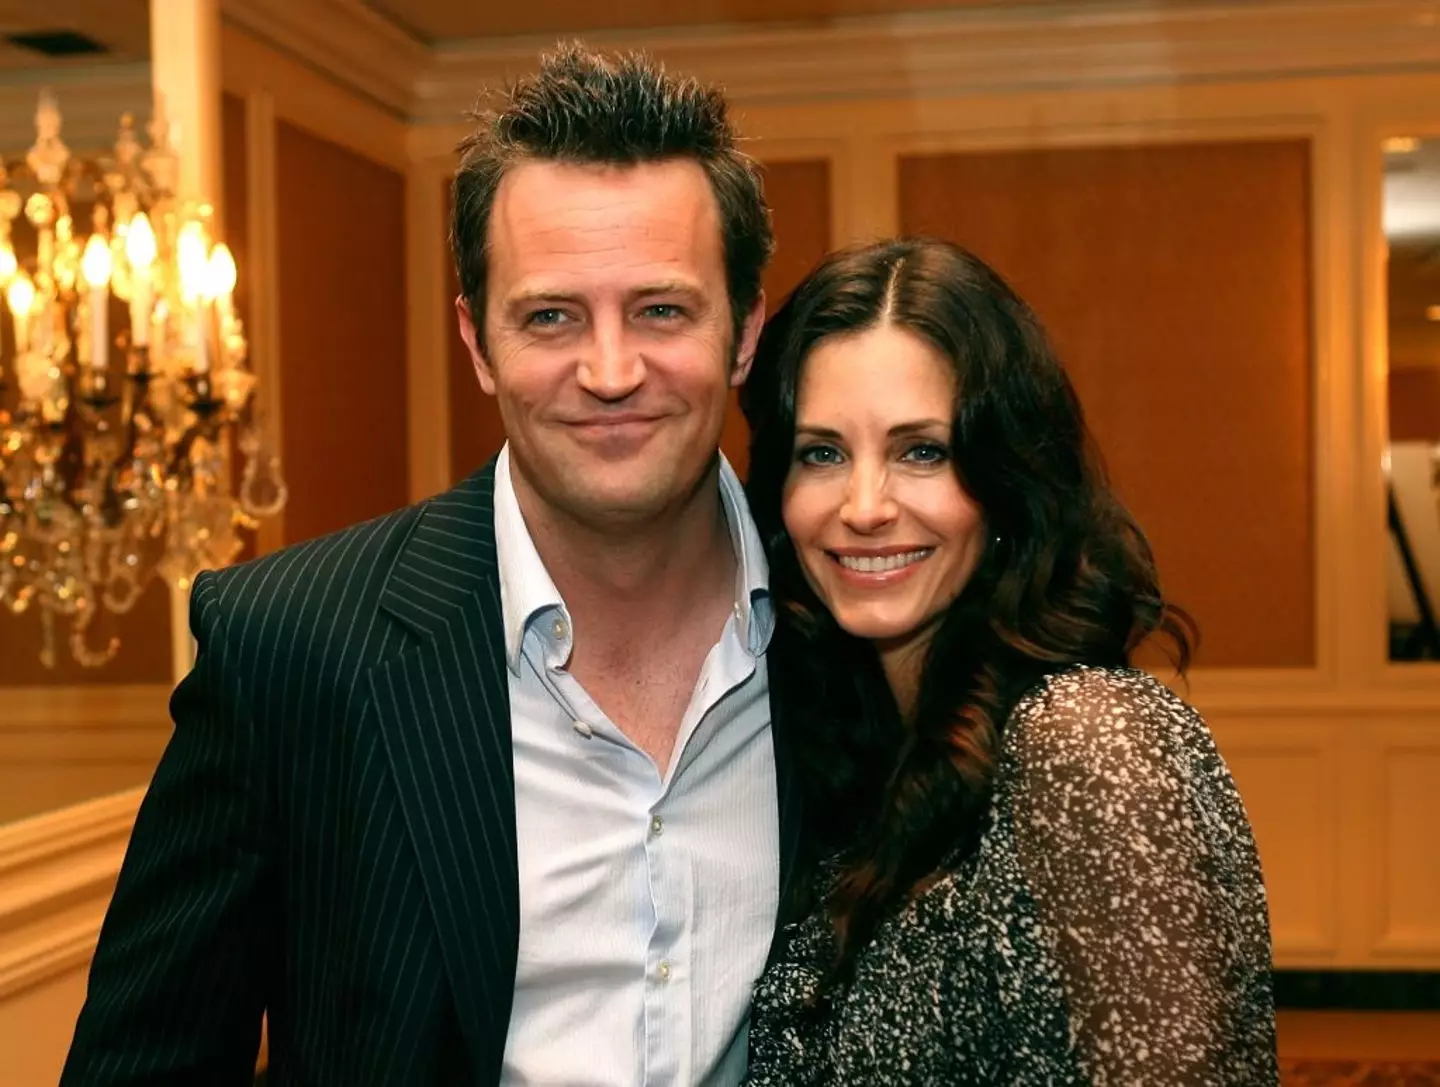 Courteney Cox paid heartfelt tribute to Matthew Perry and shared one of her favourite scenes of them together.